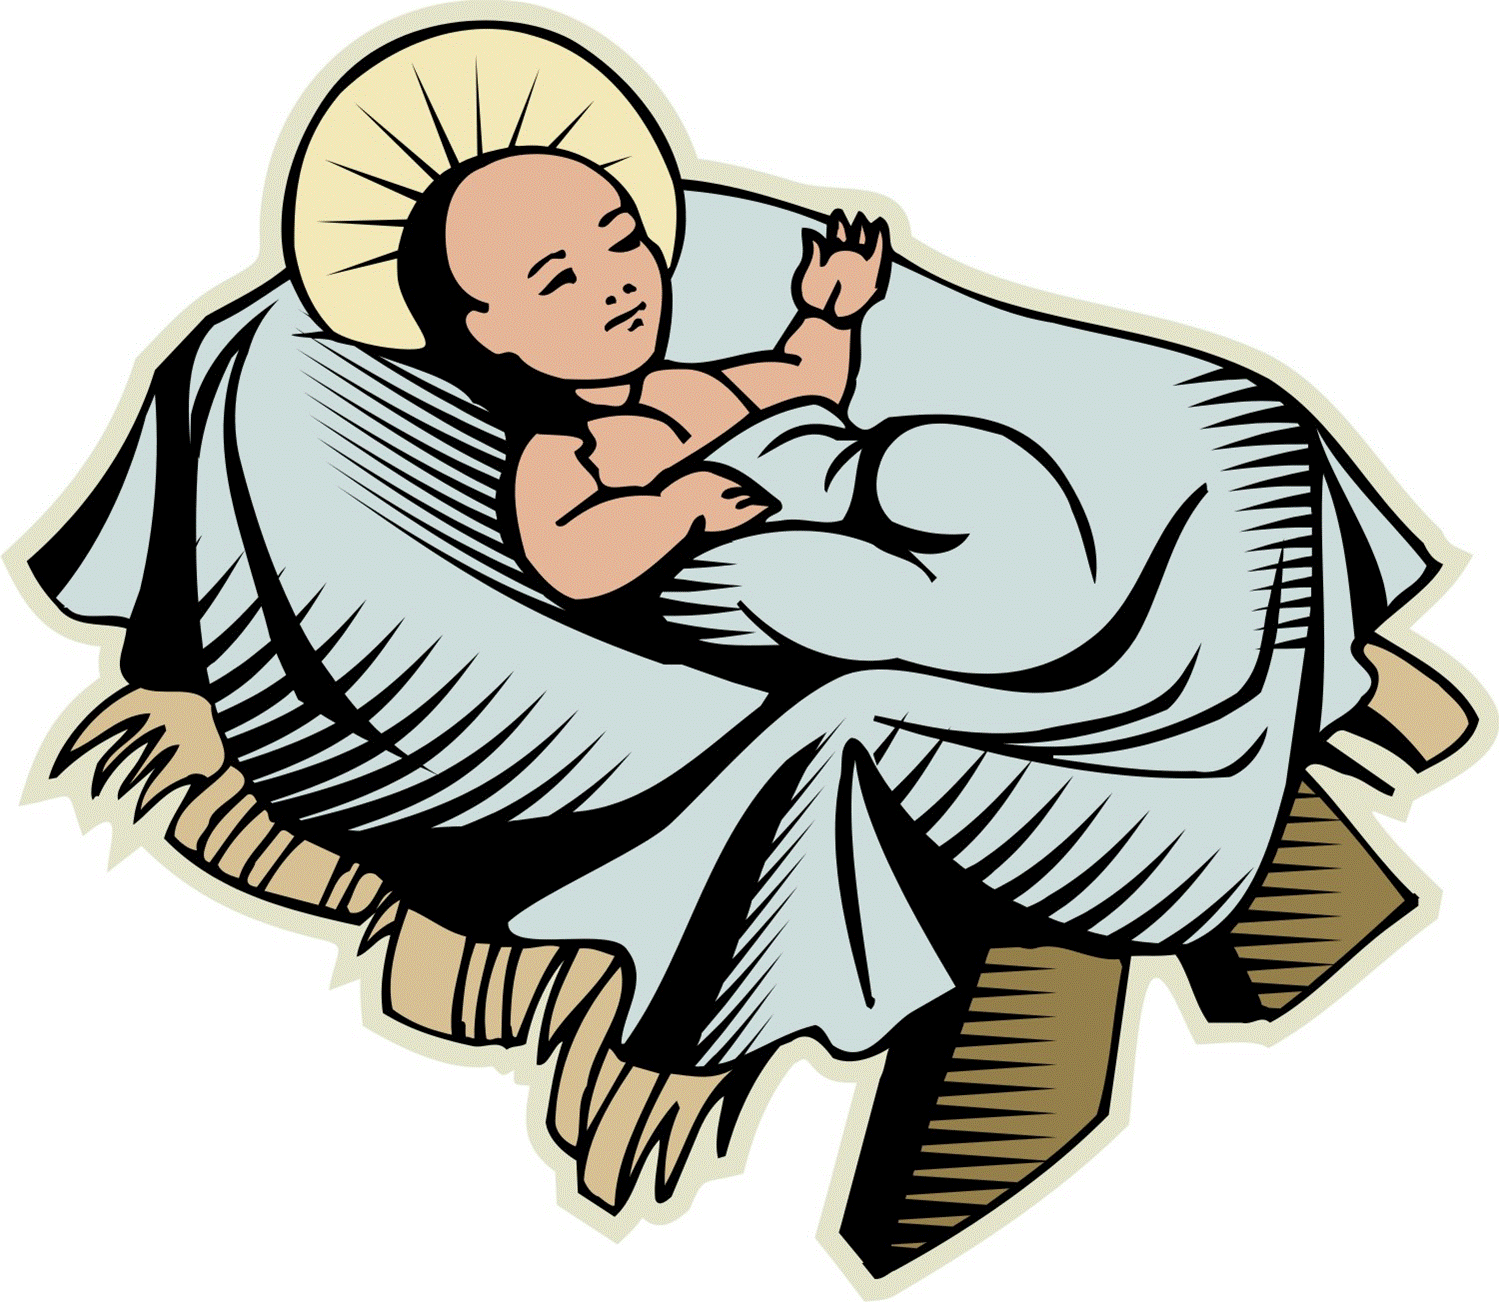 INSPIRING POEM ABOUT BABY JESUS - CHRISTMAS GREETINGS LITTLE